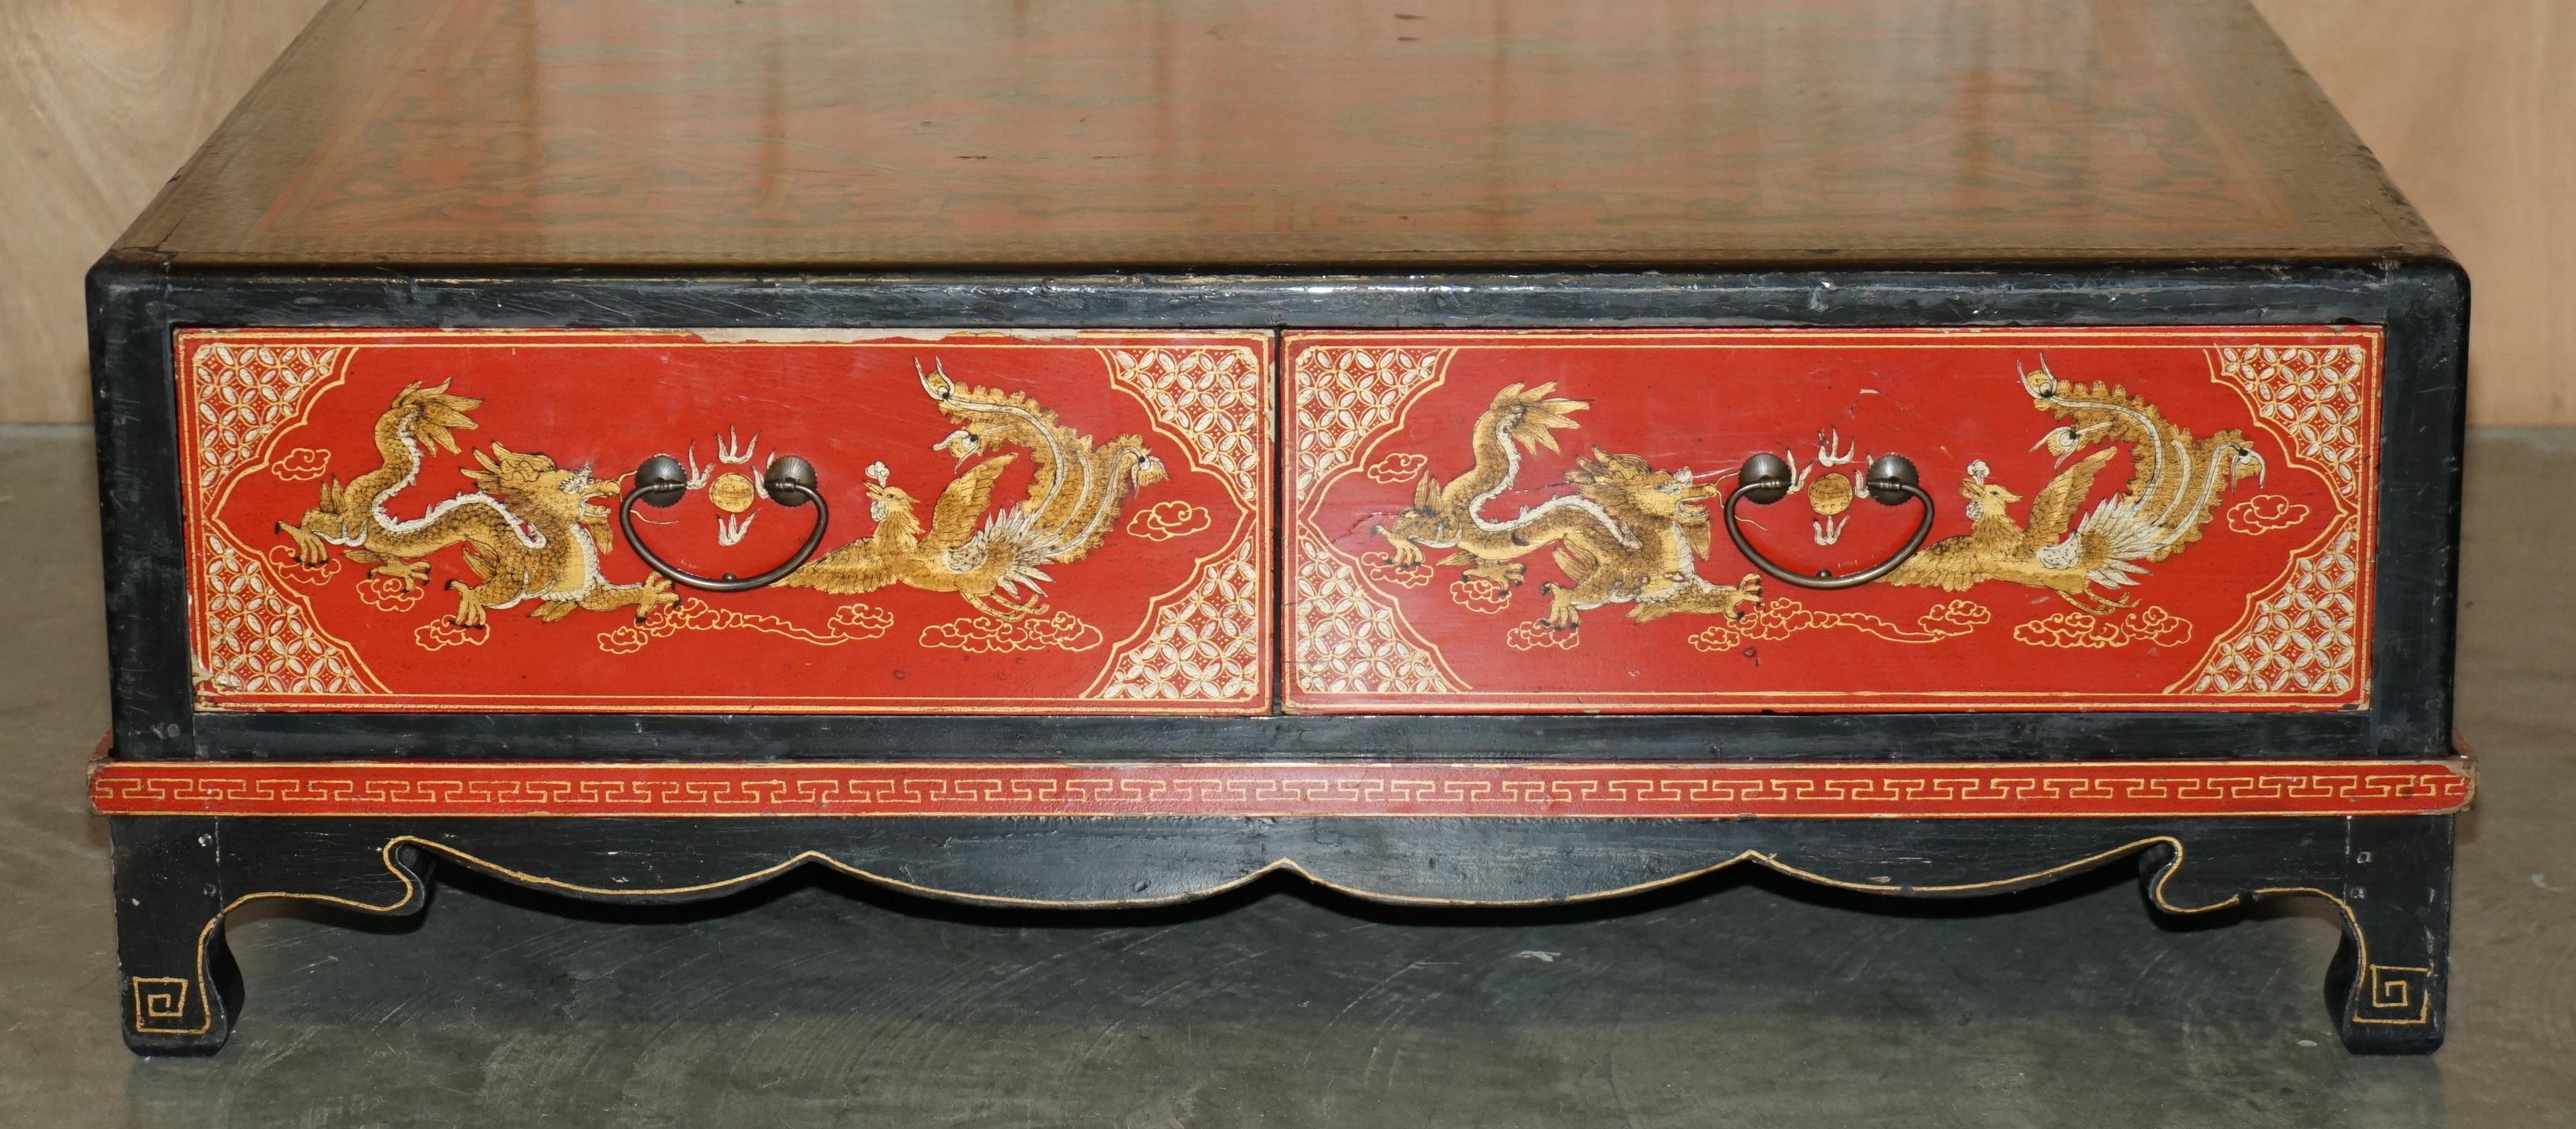 LARGE ANTIQUE CIRCA 1920 CHiNESE DRAGON CHINOISERIE EXPORT COFFEE TABLE DRAWERS For Sale 6